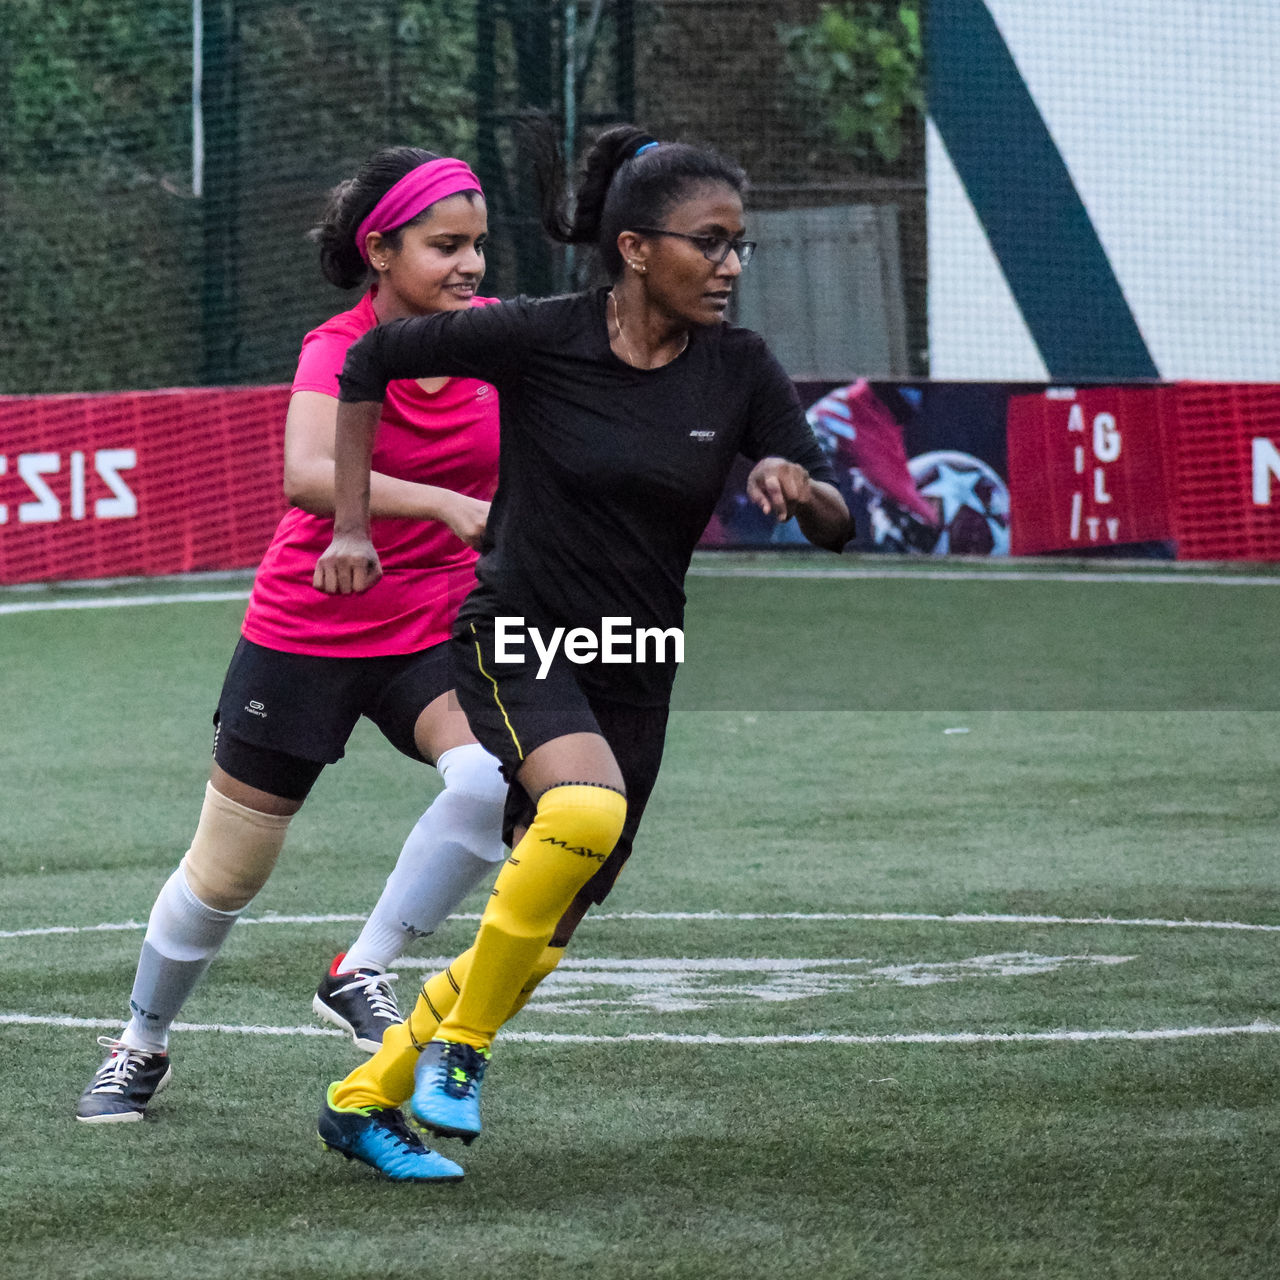 sports, player, two people, ball game, full length, adult, young adult, clothing, football player, women, sports clothing, team sport, athlete, lifestyles, tournament, soccer, togetherness, motion, exercising, competition, leisure activity, activity, competition event, female, child, sports equipment, outdoors, day, vitality, architecture